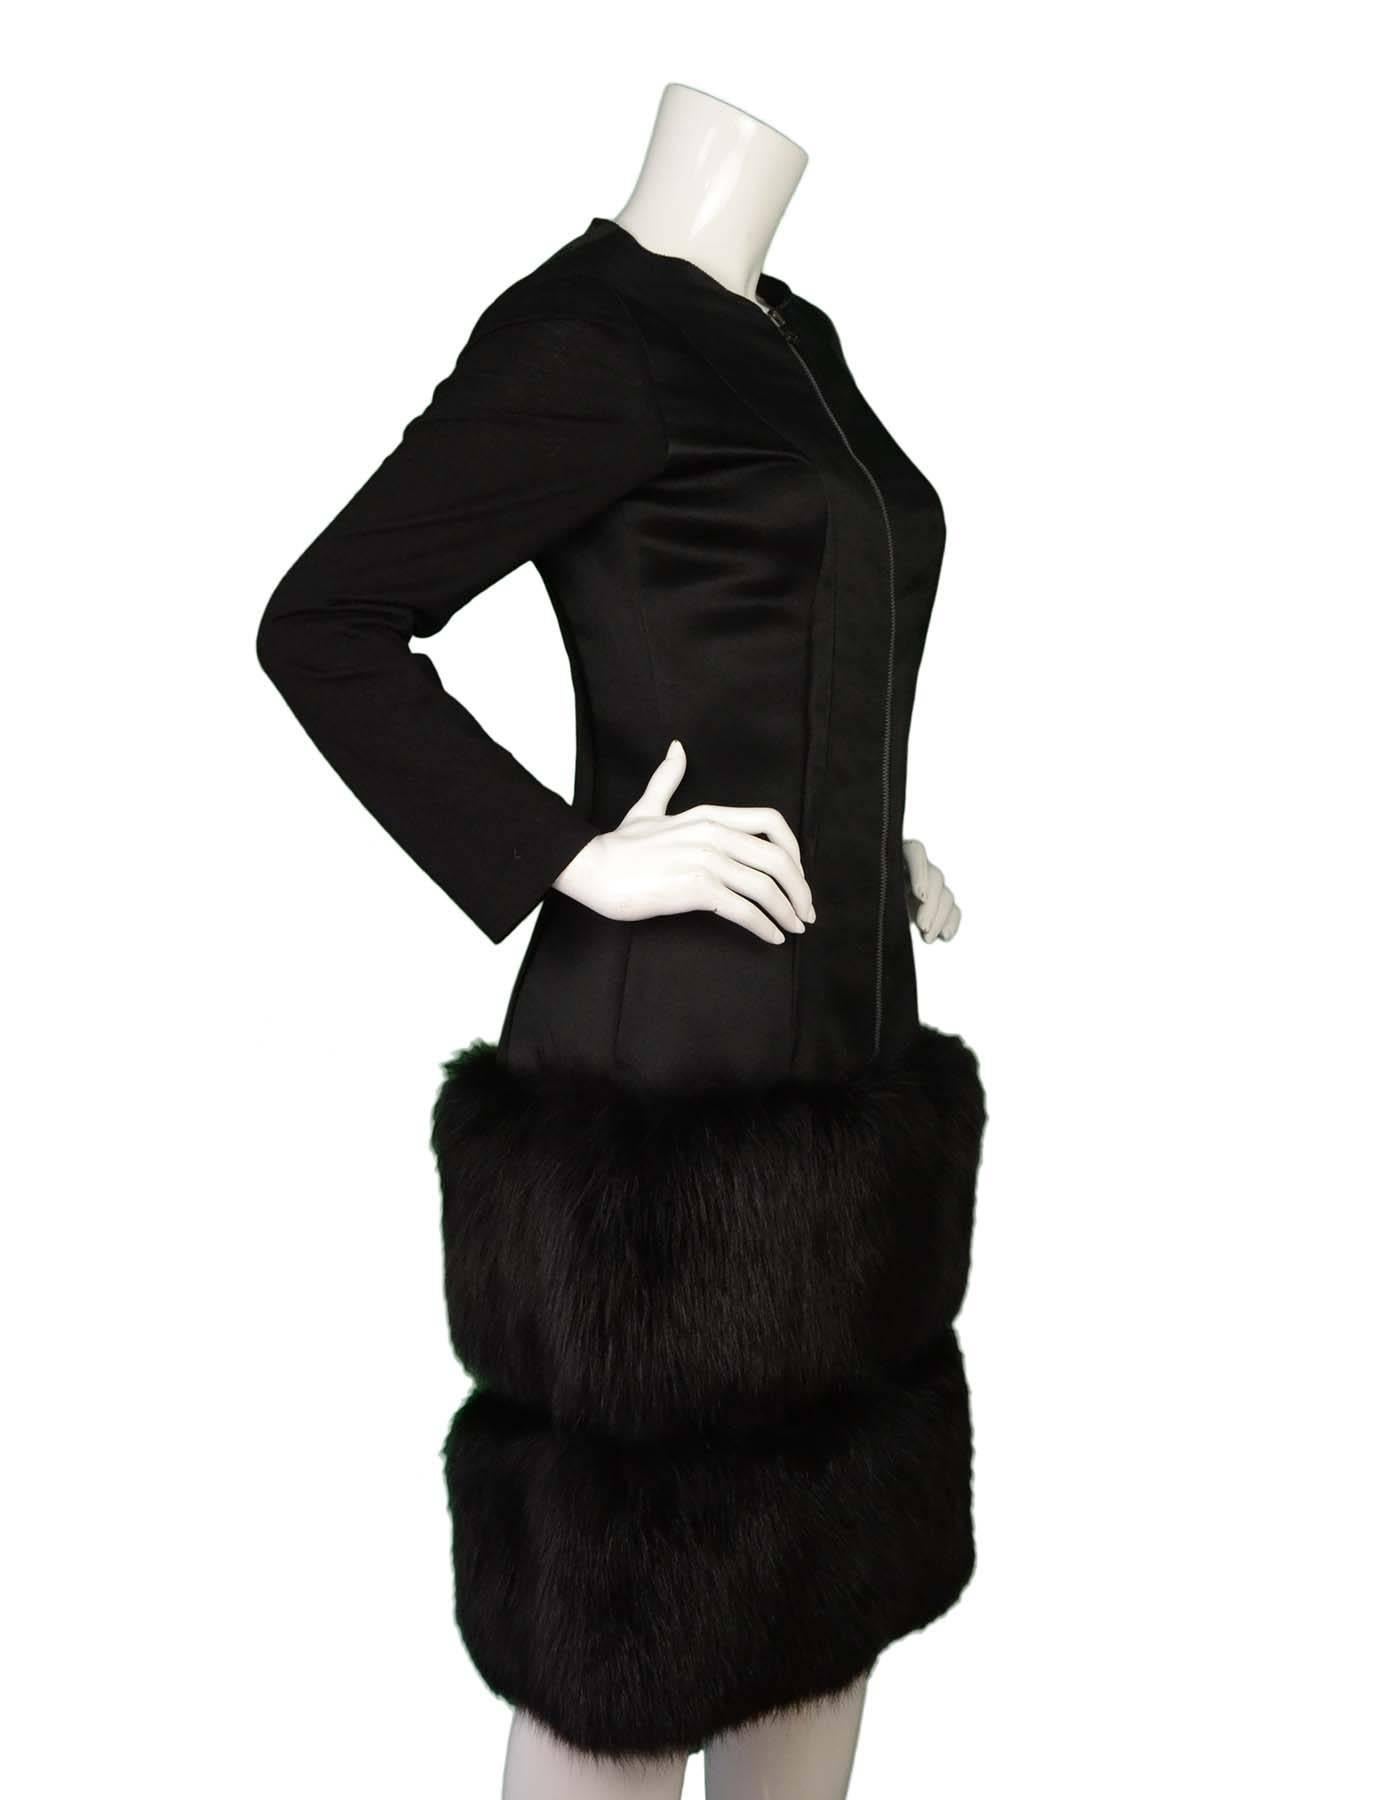 Features fox fur drop waist skirt

    Made In: France
    Year of Production: 2007
    Color: Black
    Composition: Panels of 100% silk and 100% wool
    Lining: Black silk
    Closure/Opening: Exposed zip closure at front
    Retail